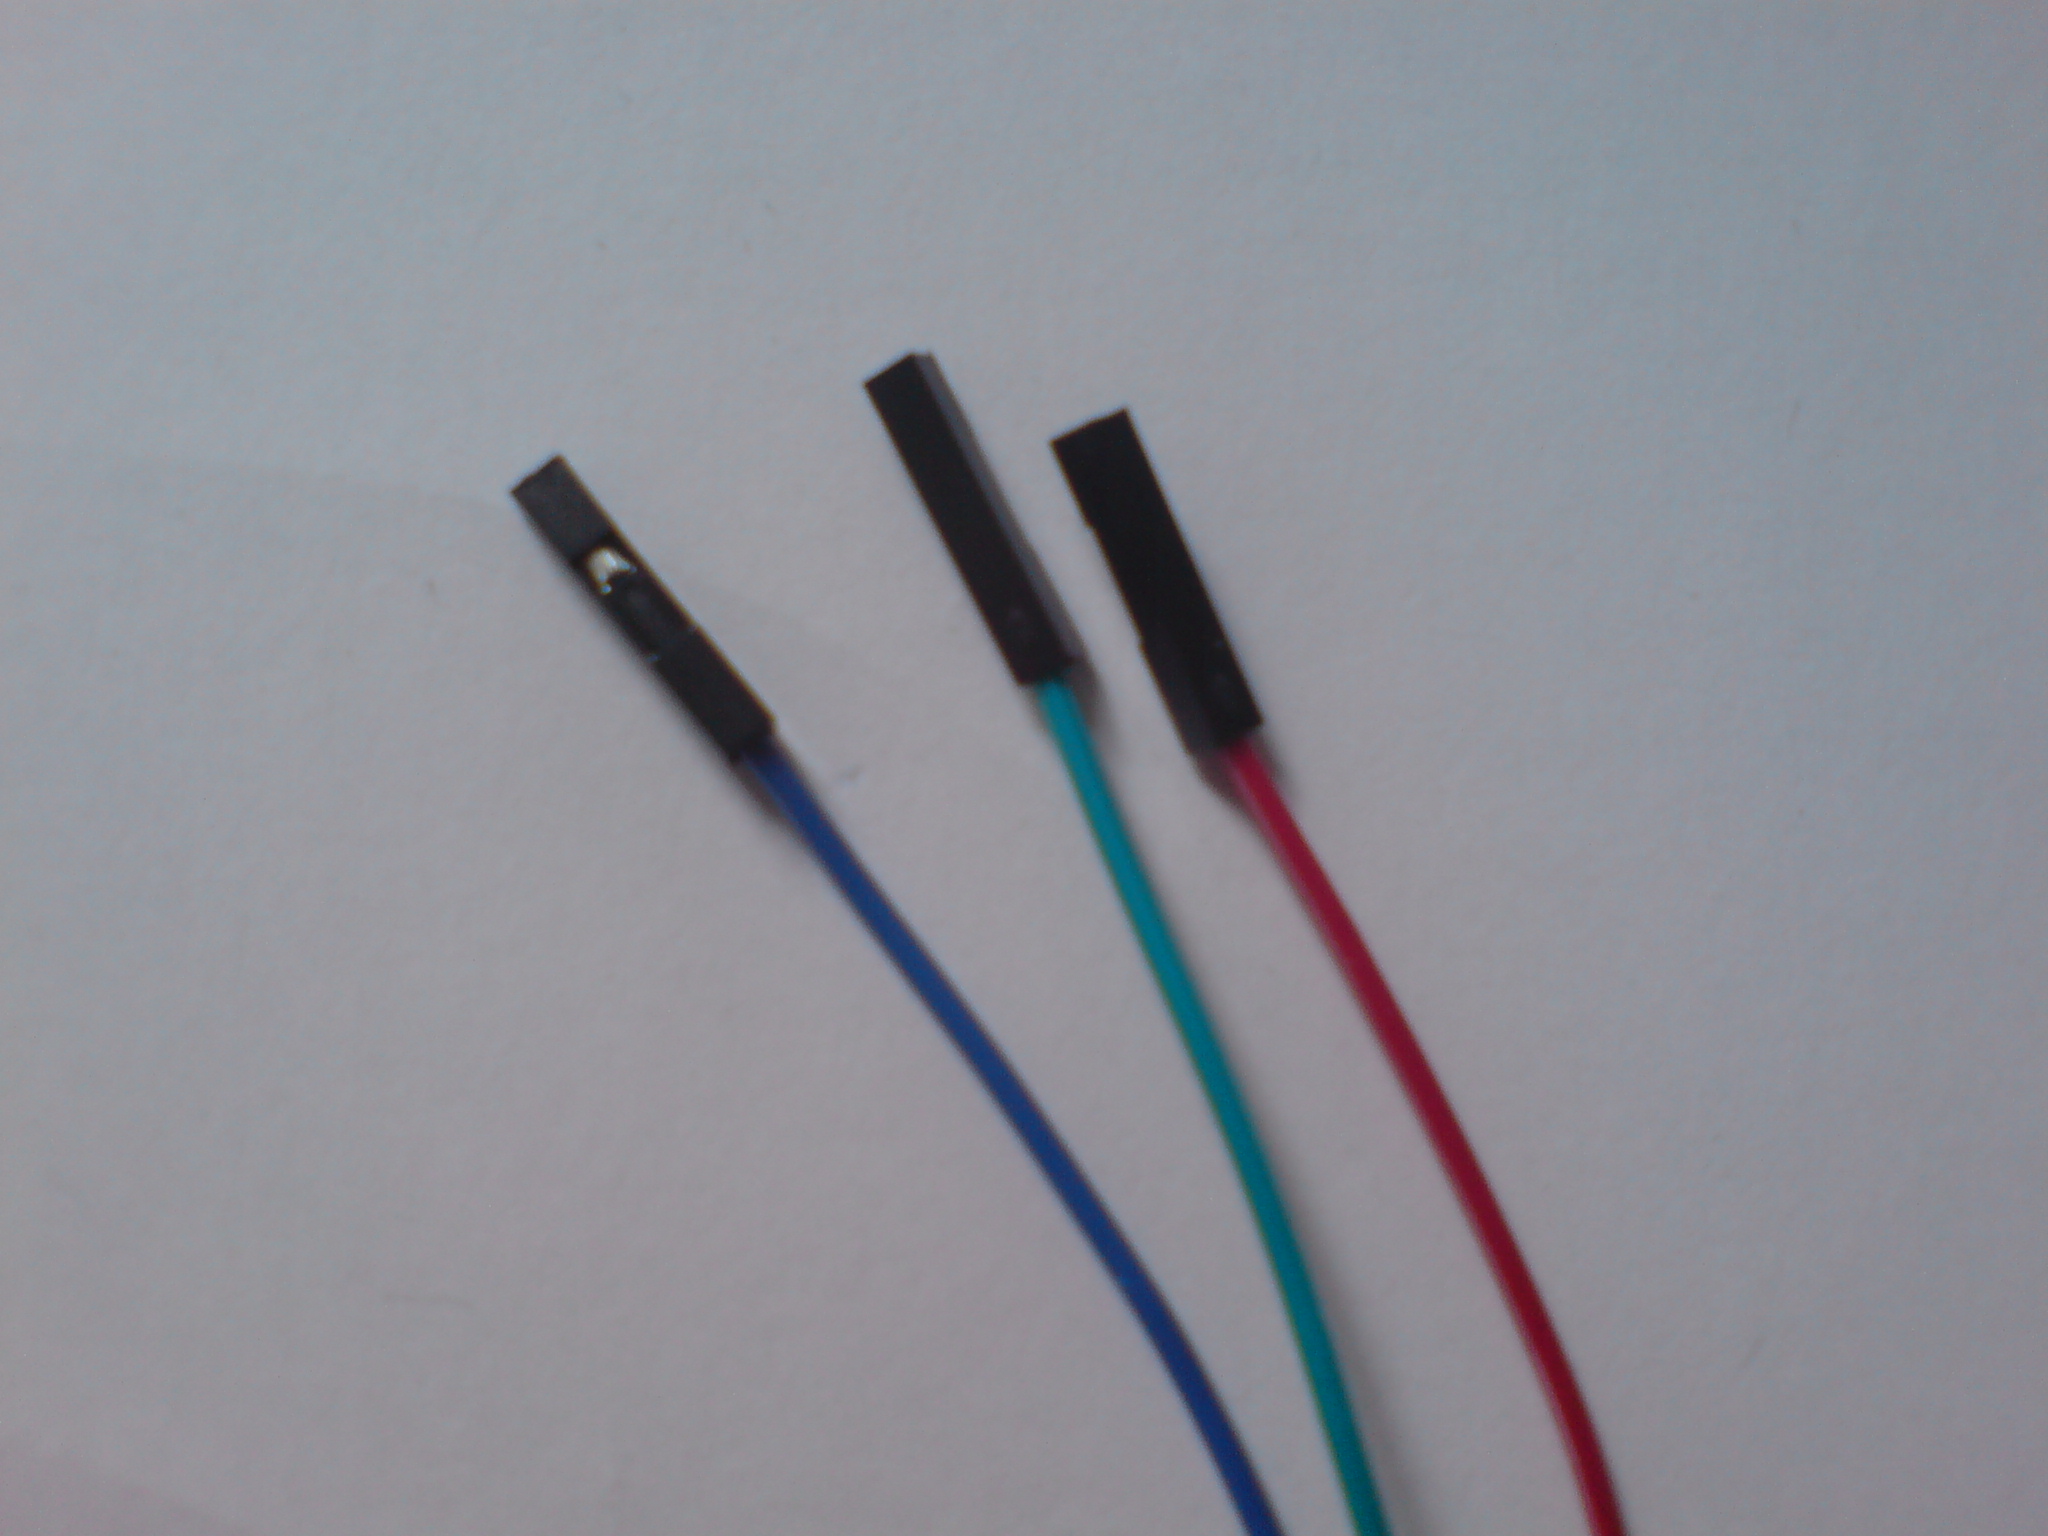 Three color wires (red, green, blue)